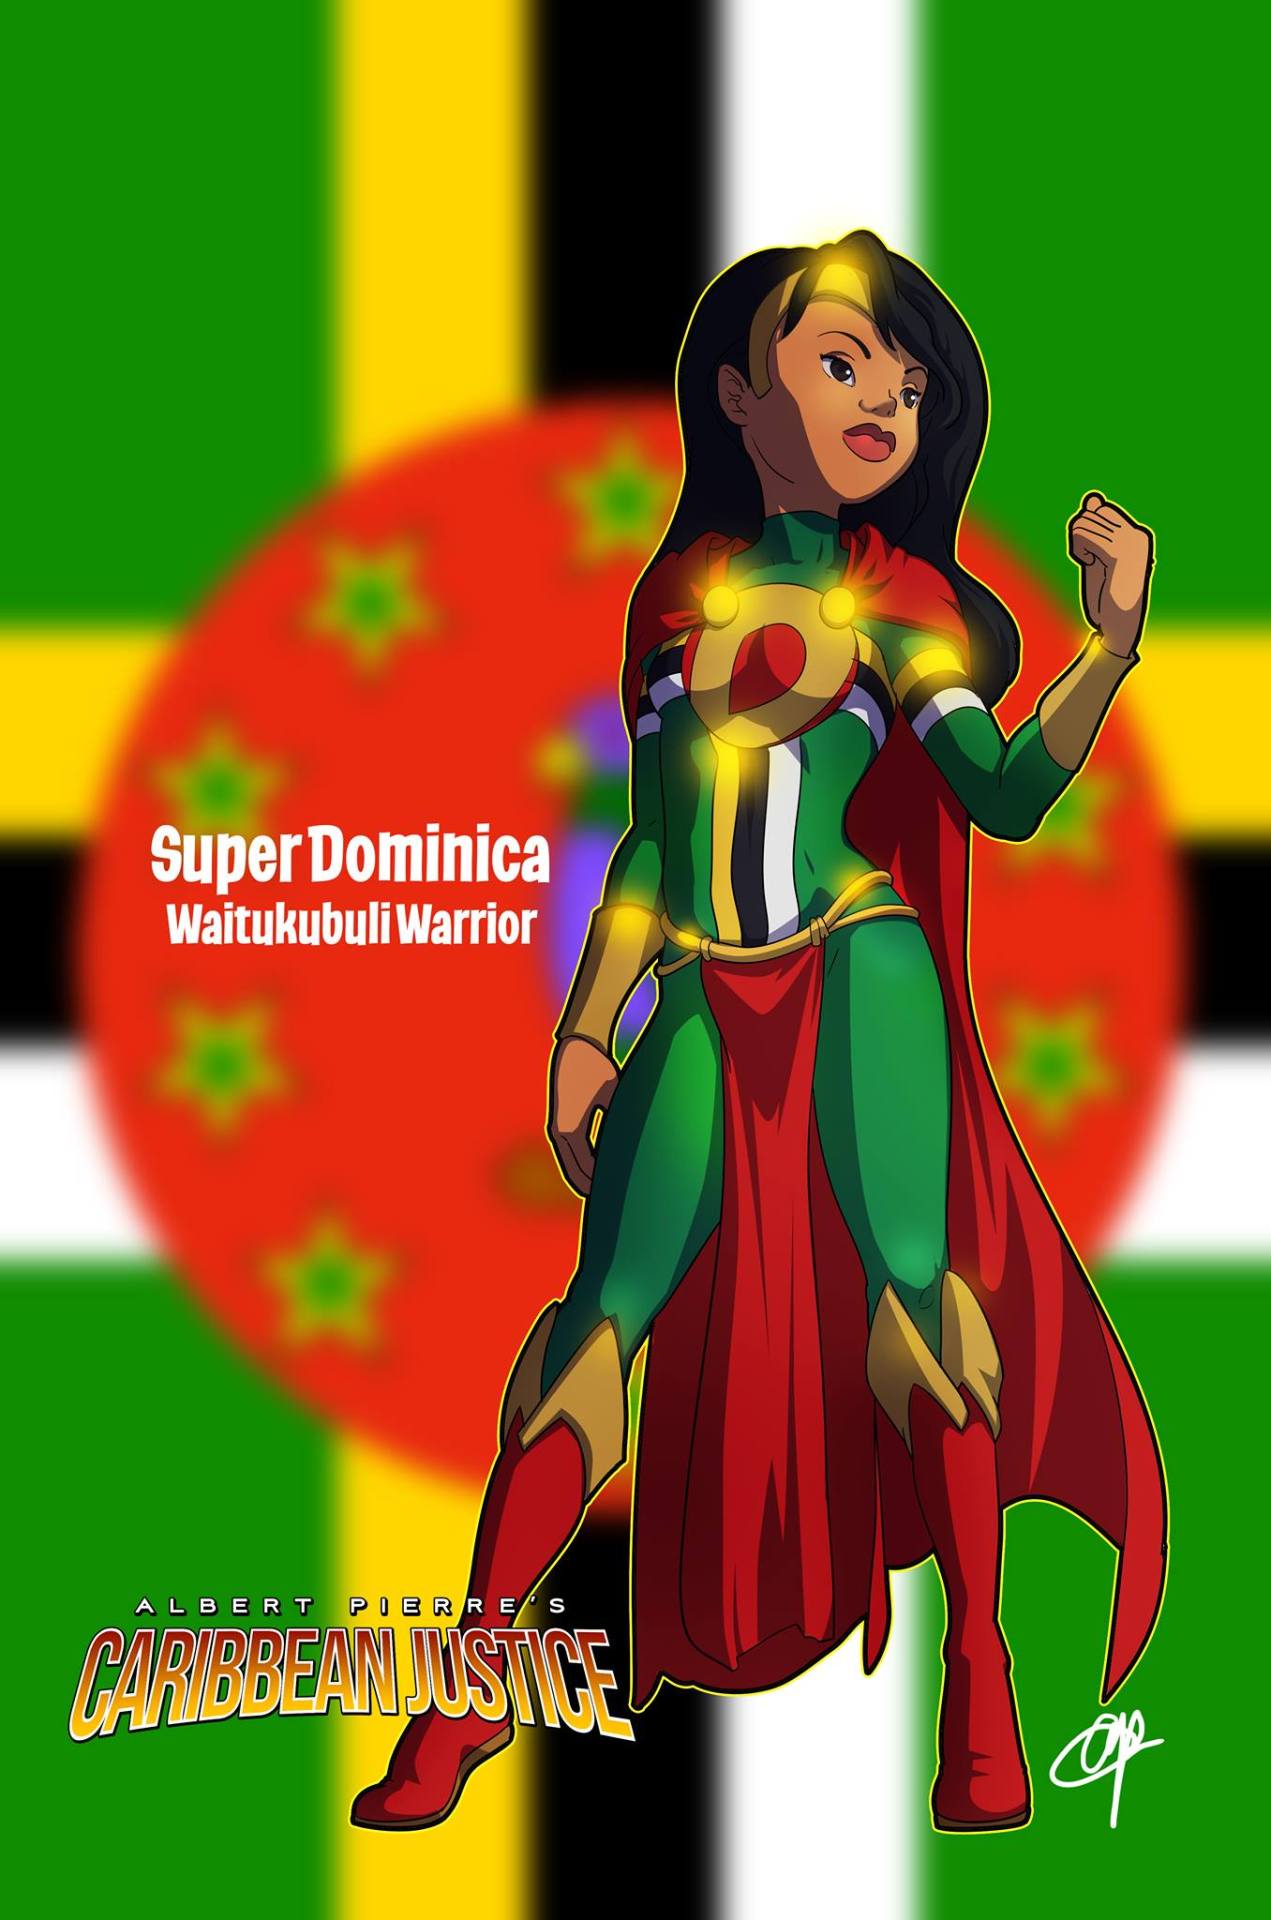 superheroesincolor:     Super Dominica, The Caribbean Justice Alliance  by Albert